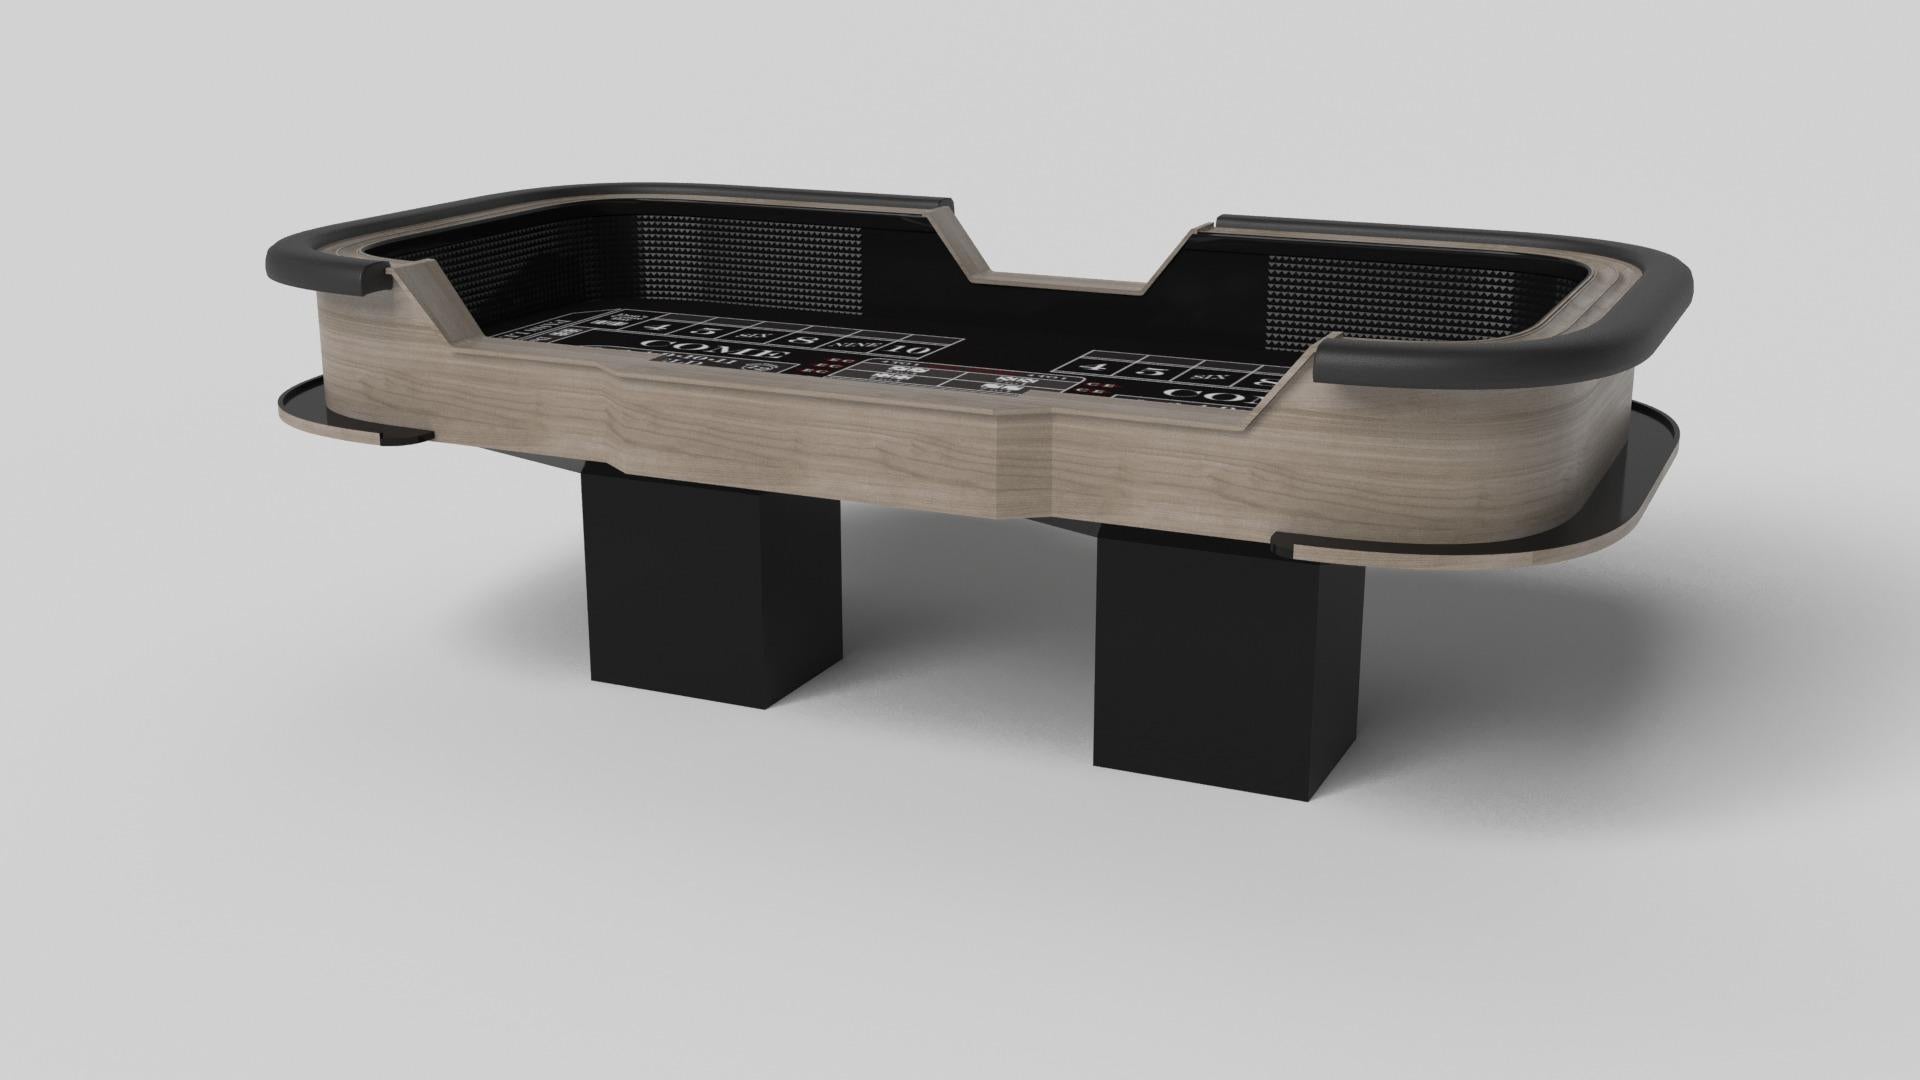 Minimalist design meets opulent elegance in the Trestle craps table. Detailed with a professional surface for endless game play, this contemporary table is expertly crafted. Square block legs give it a stark, geometric look that contributes to its